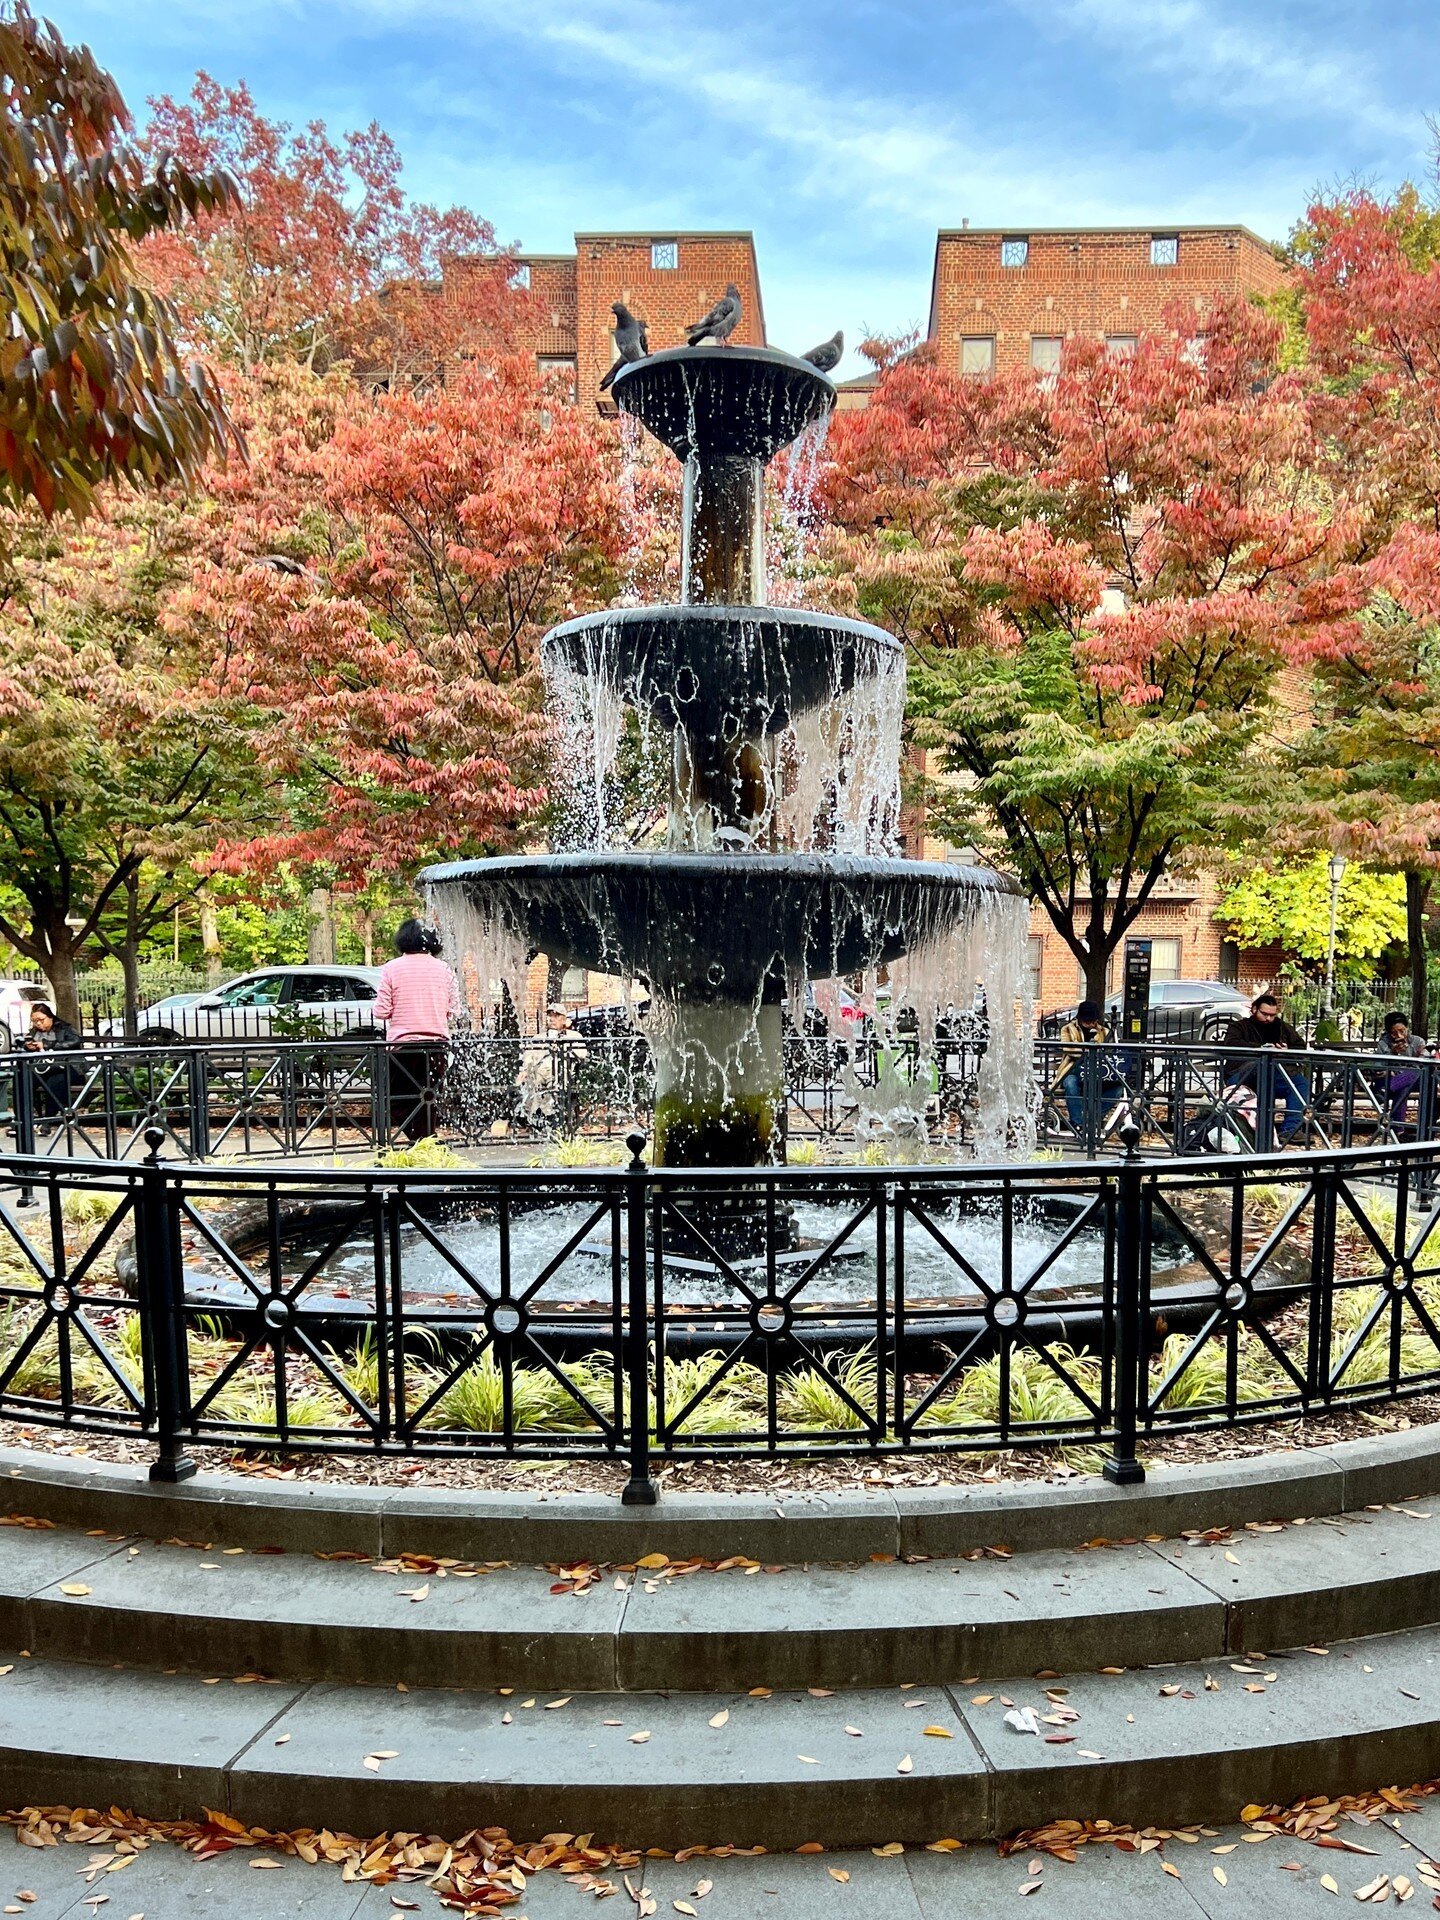 Peaceful autumn moments in Greenwich Village 😍
⛲
🏙️
🗝️
🚕
✨
#westvillage #thevillage #luxurynyc #luxury #luxuryapartments #manhattan #nyc #wsp #nycapartments #nycbroker #listing #selling #buying #househunting #curbappeal #manhattan #buyers #autumn